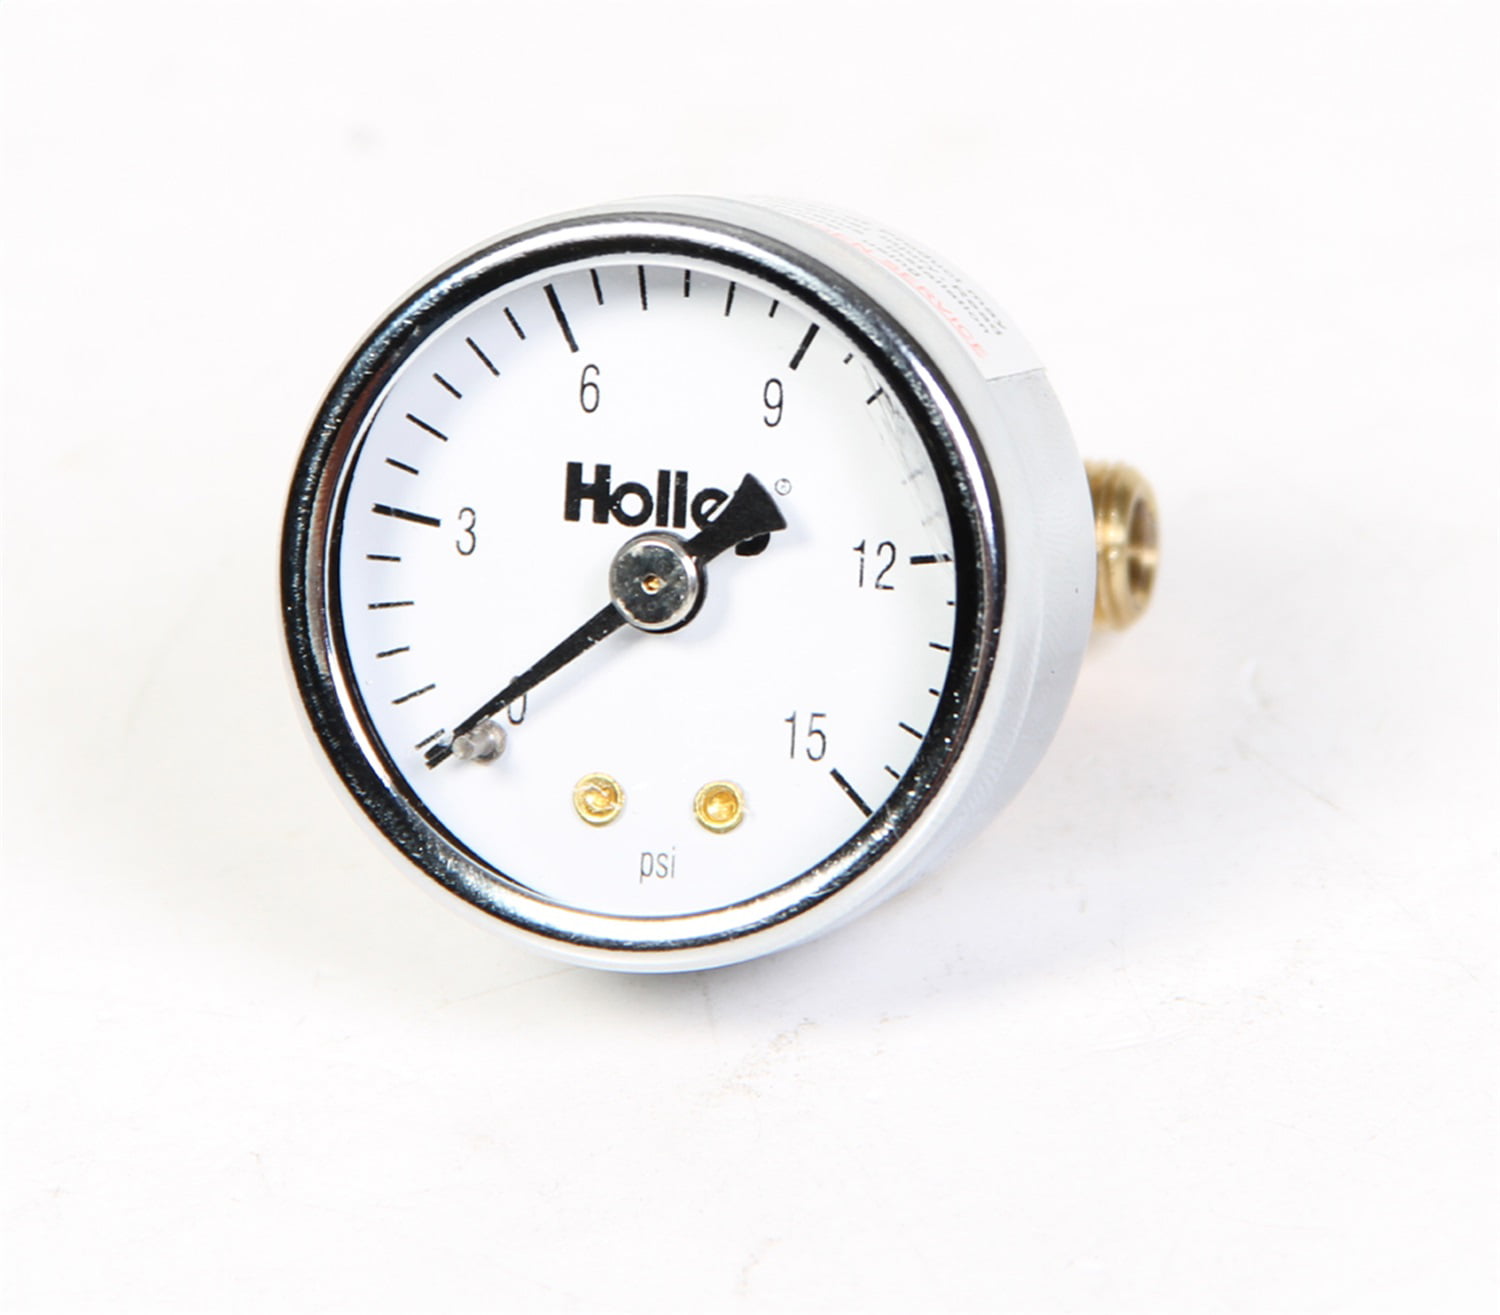 SPECTRE #SPE-59013 Fuel Pressure Gauge with Fitting 